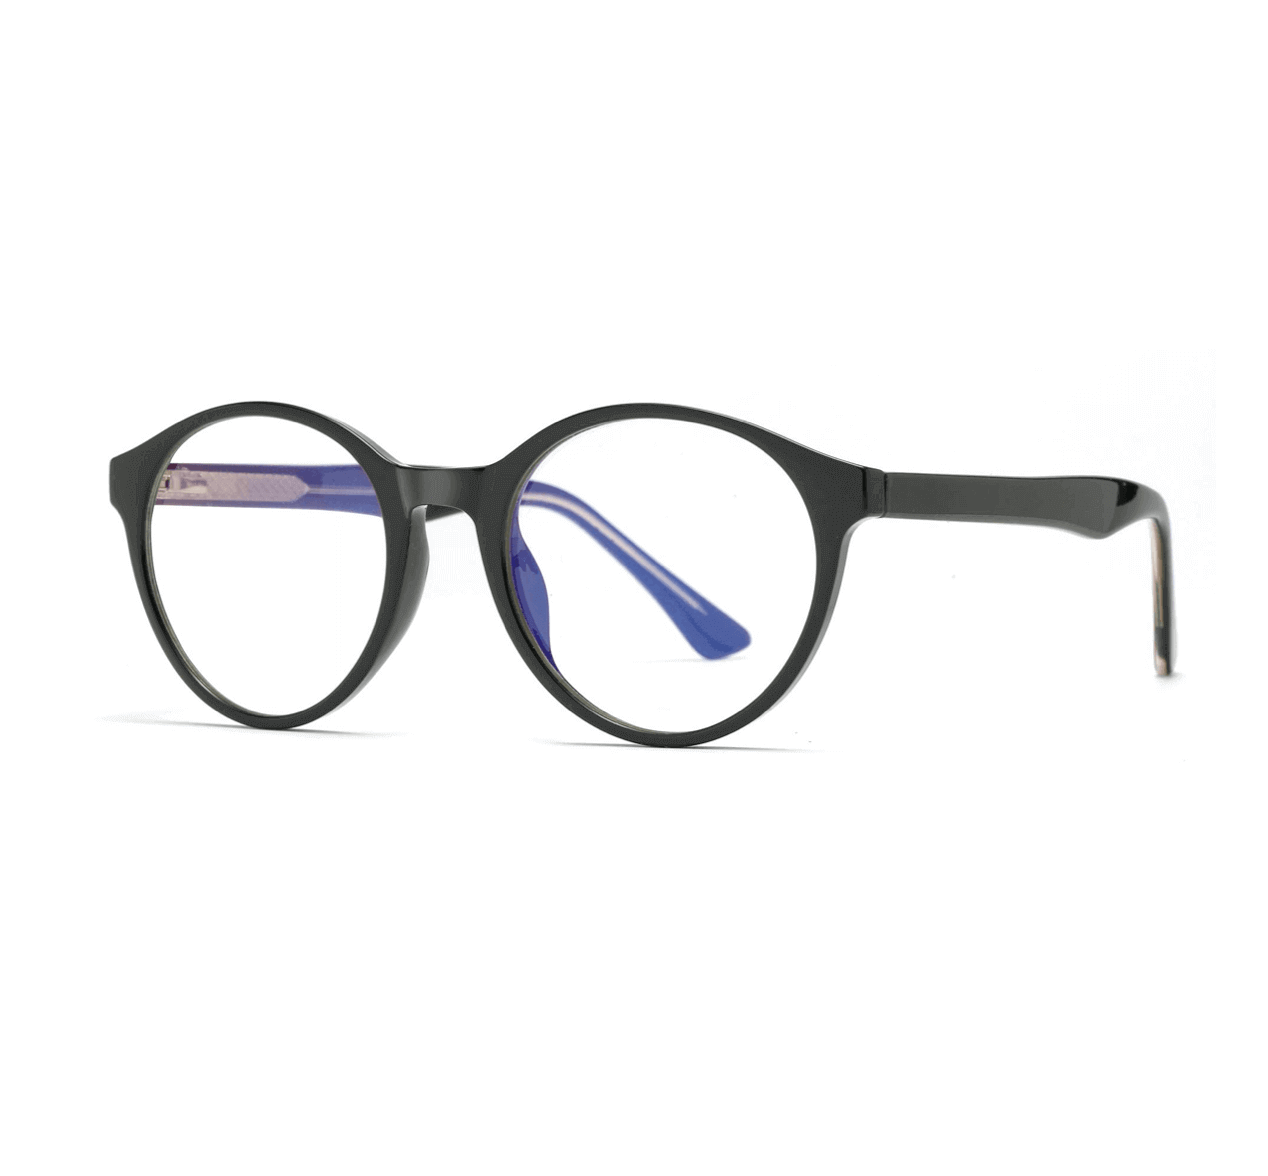 Wholesale Blue Light Glasses Manufacturer and Supplier in China